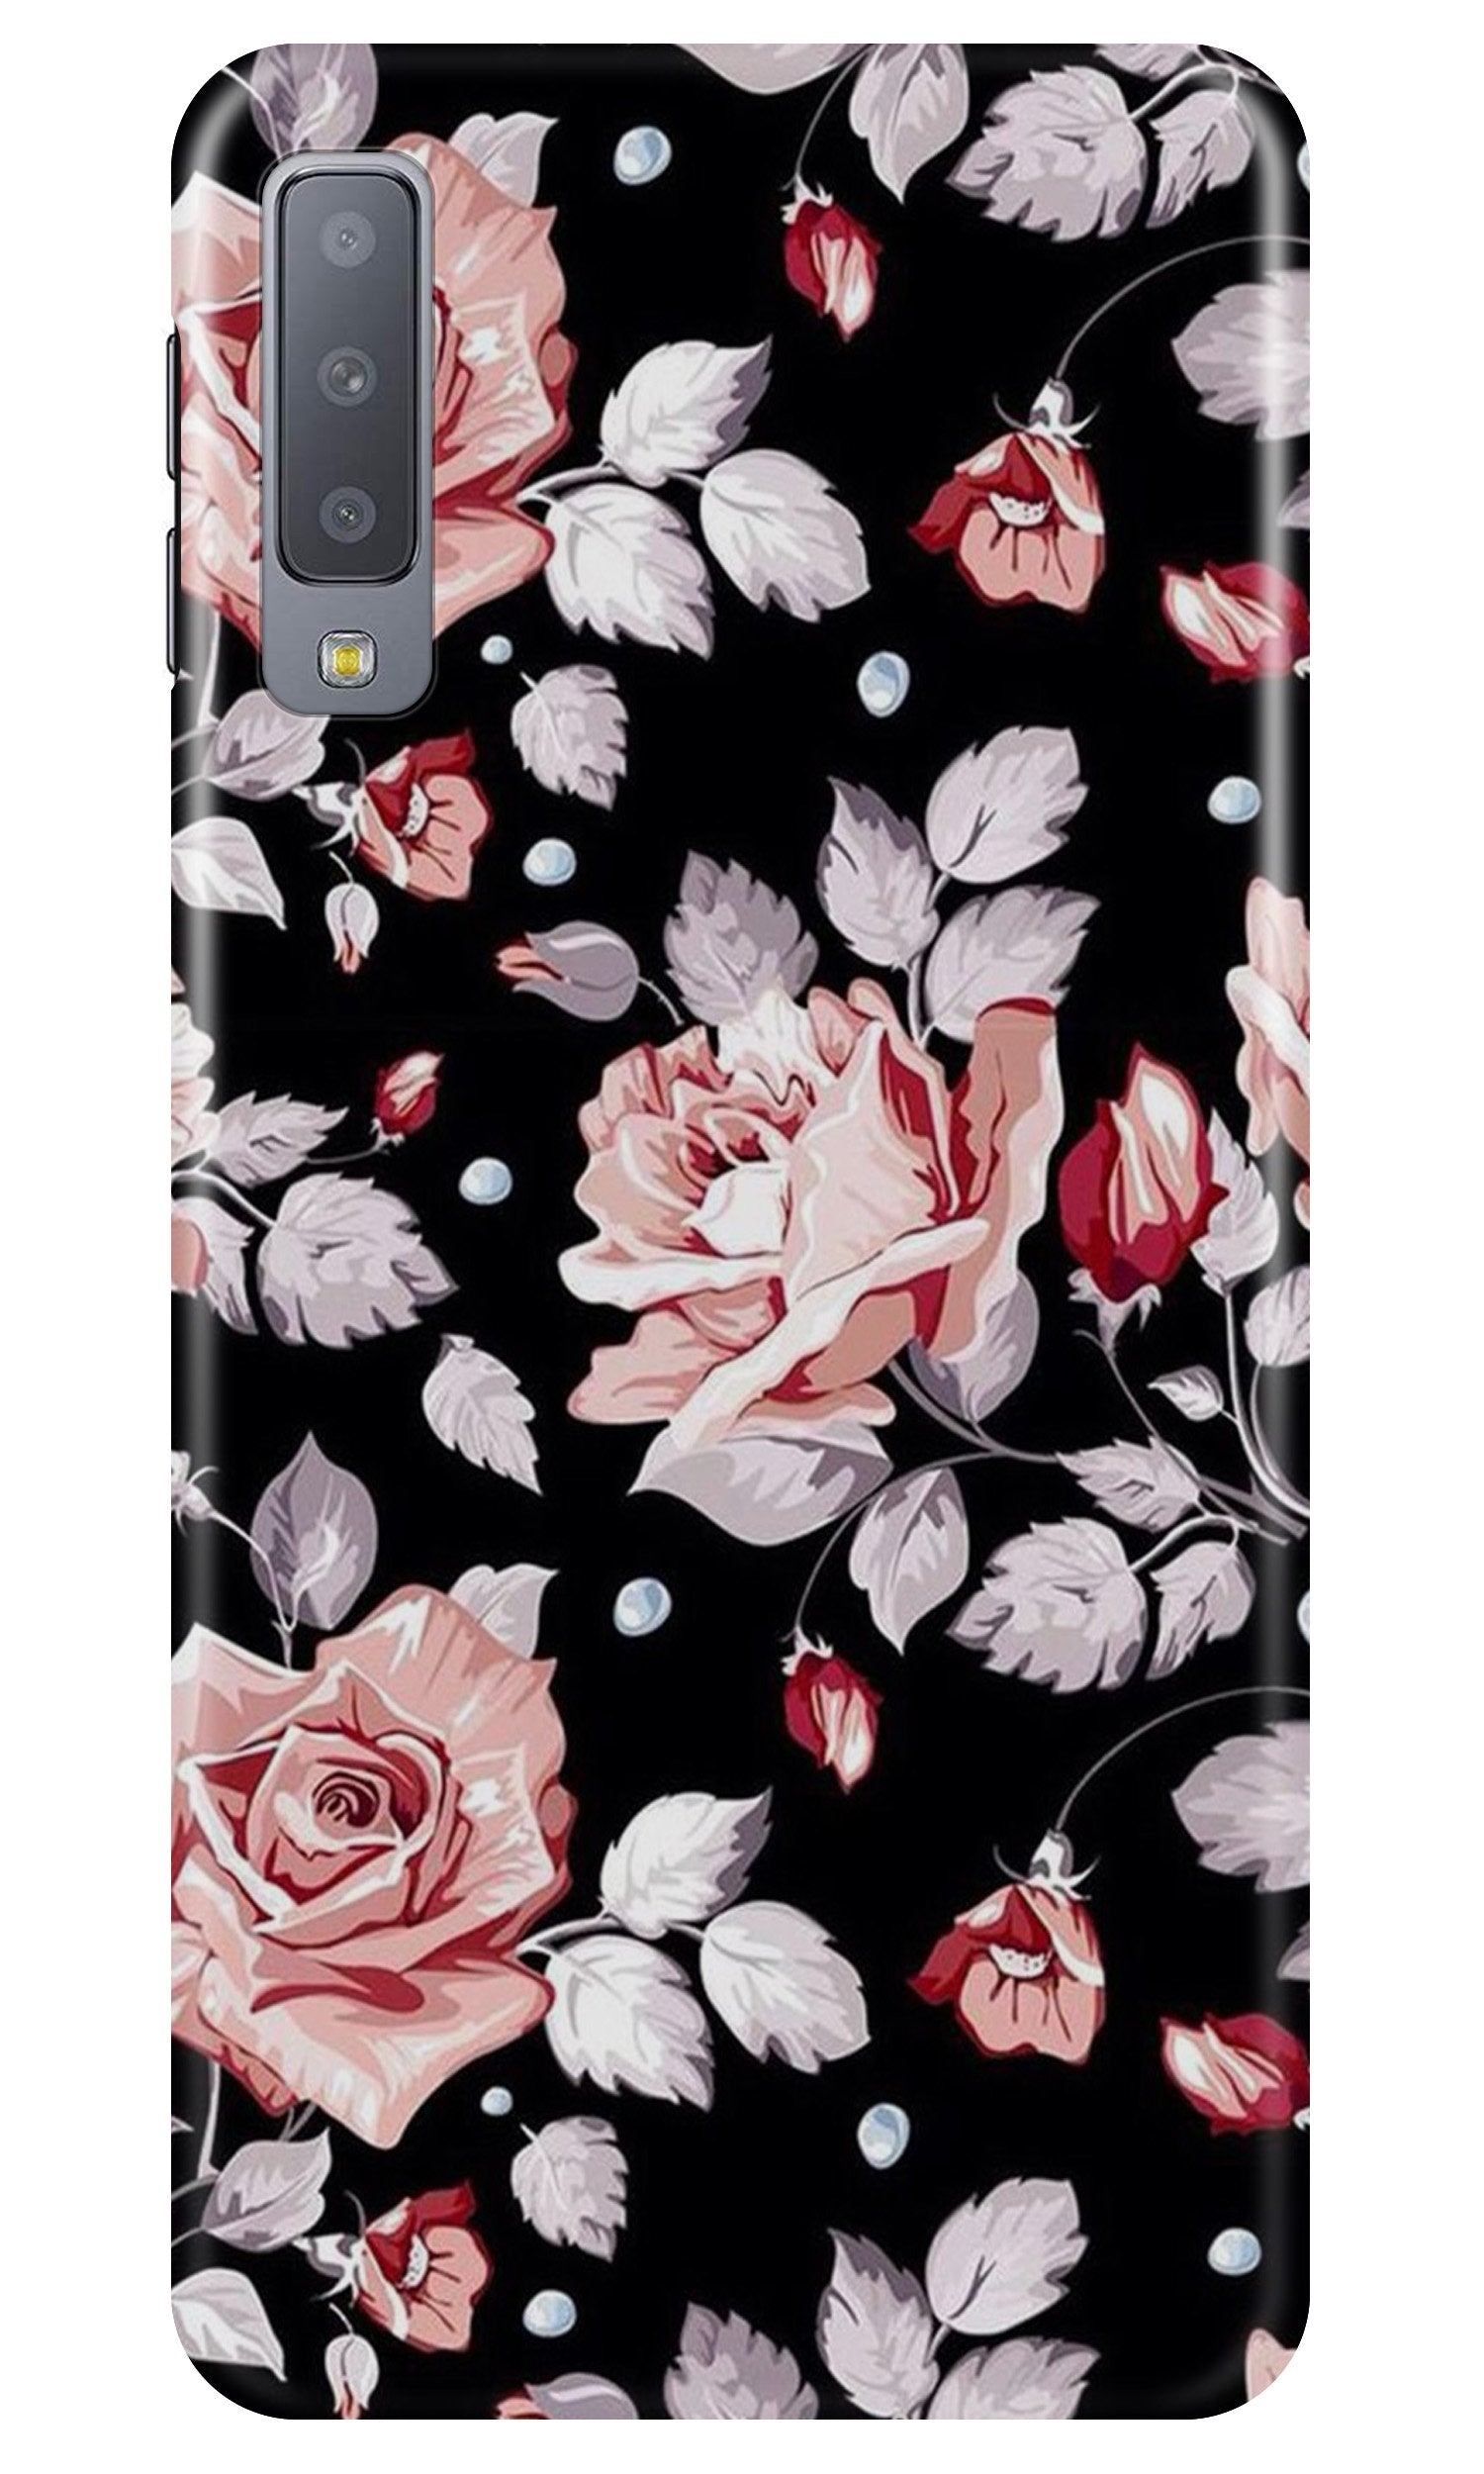 Pink rose Case for Samung Galaxy A70s